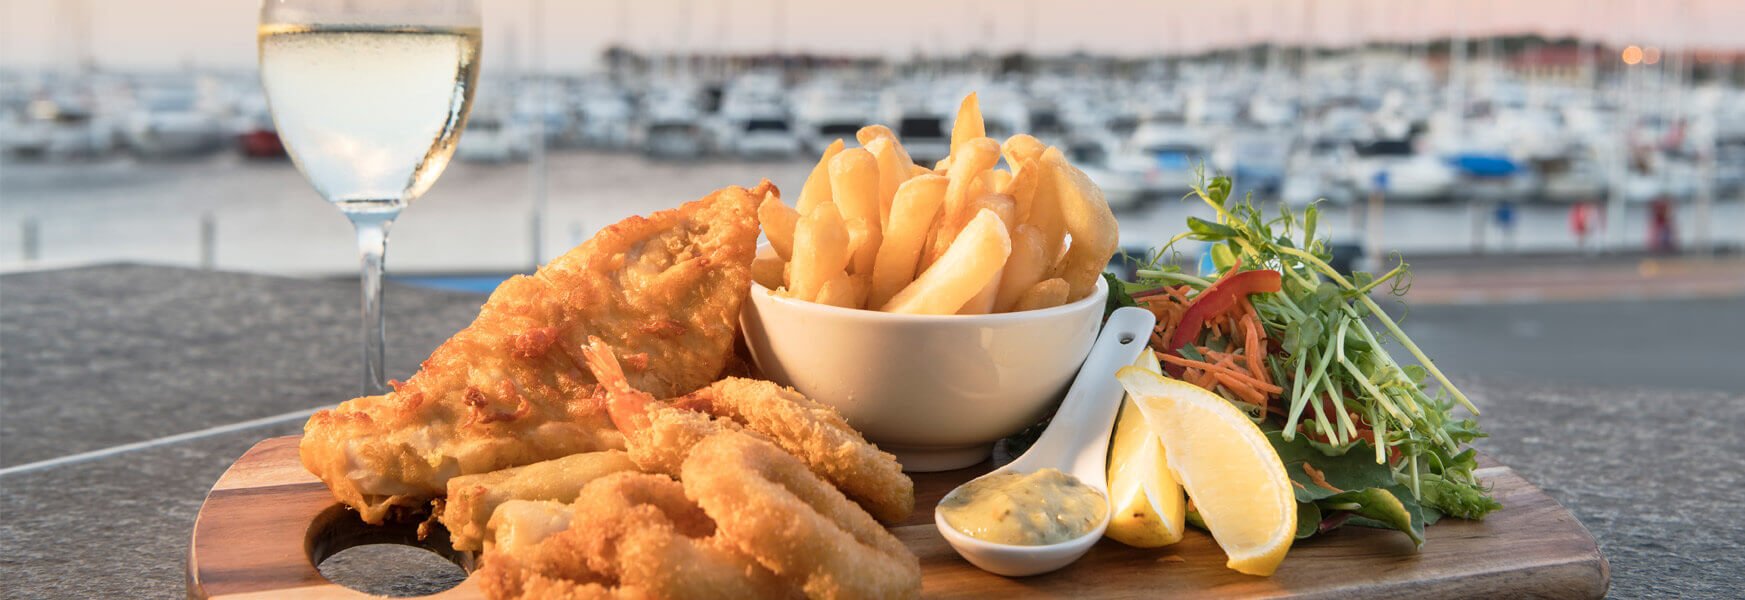 A fish and chips dish on a wooden board besides a glass of white wine, with the Hillary's boat harbour in the background